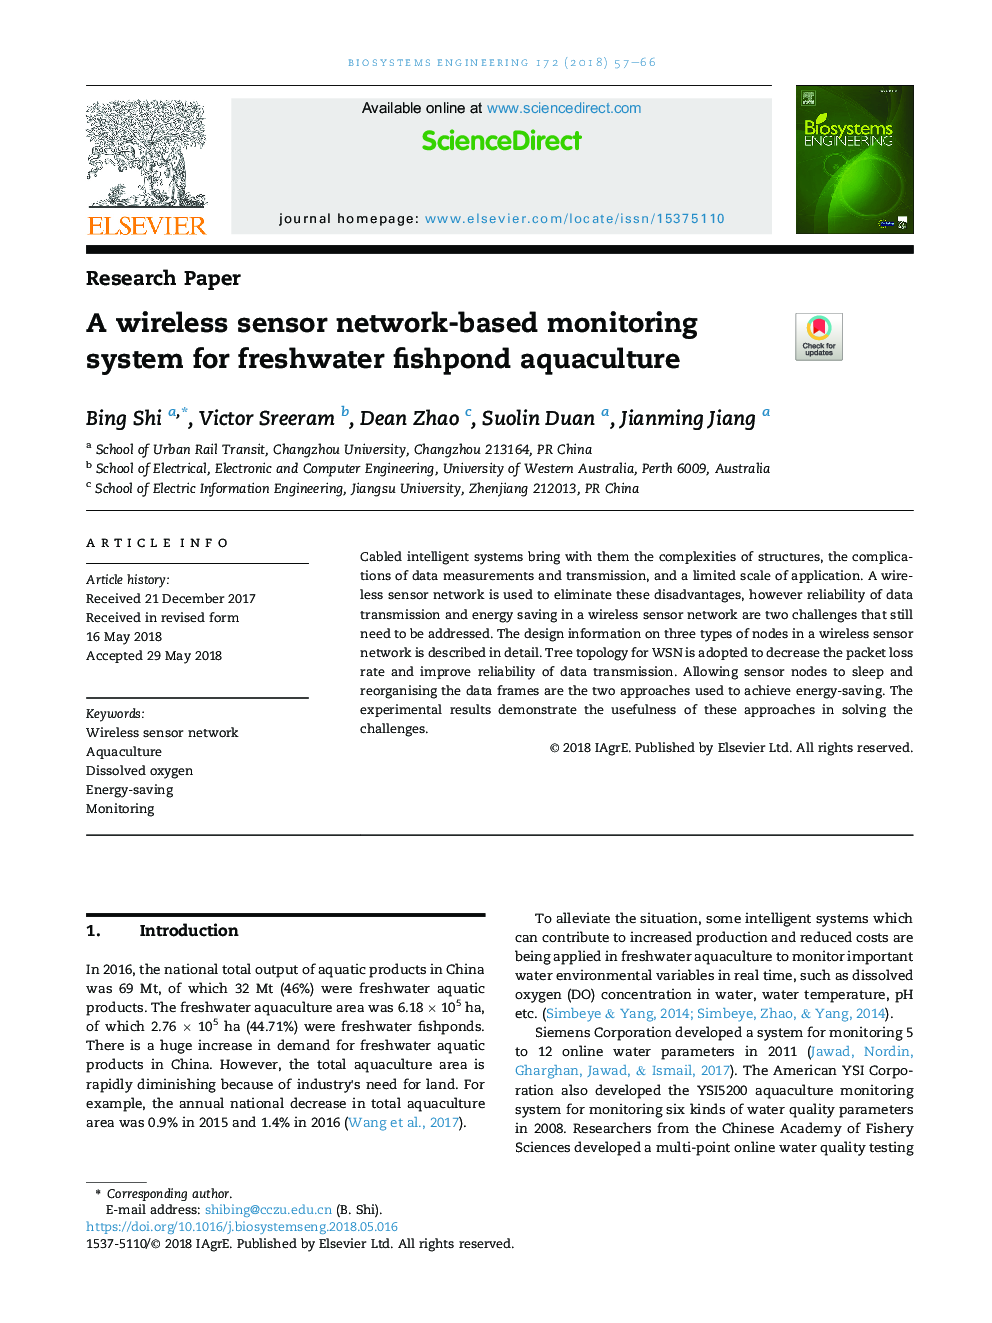 A wireless sensor network-based monitoring system for freshwater fishpond aquaculture